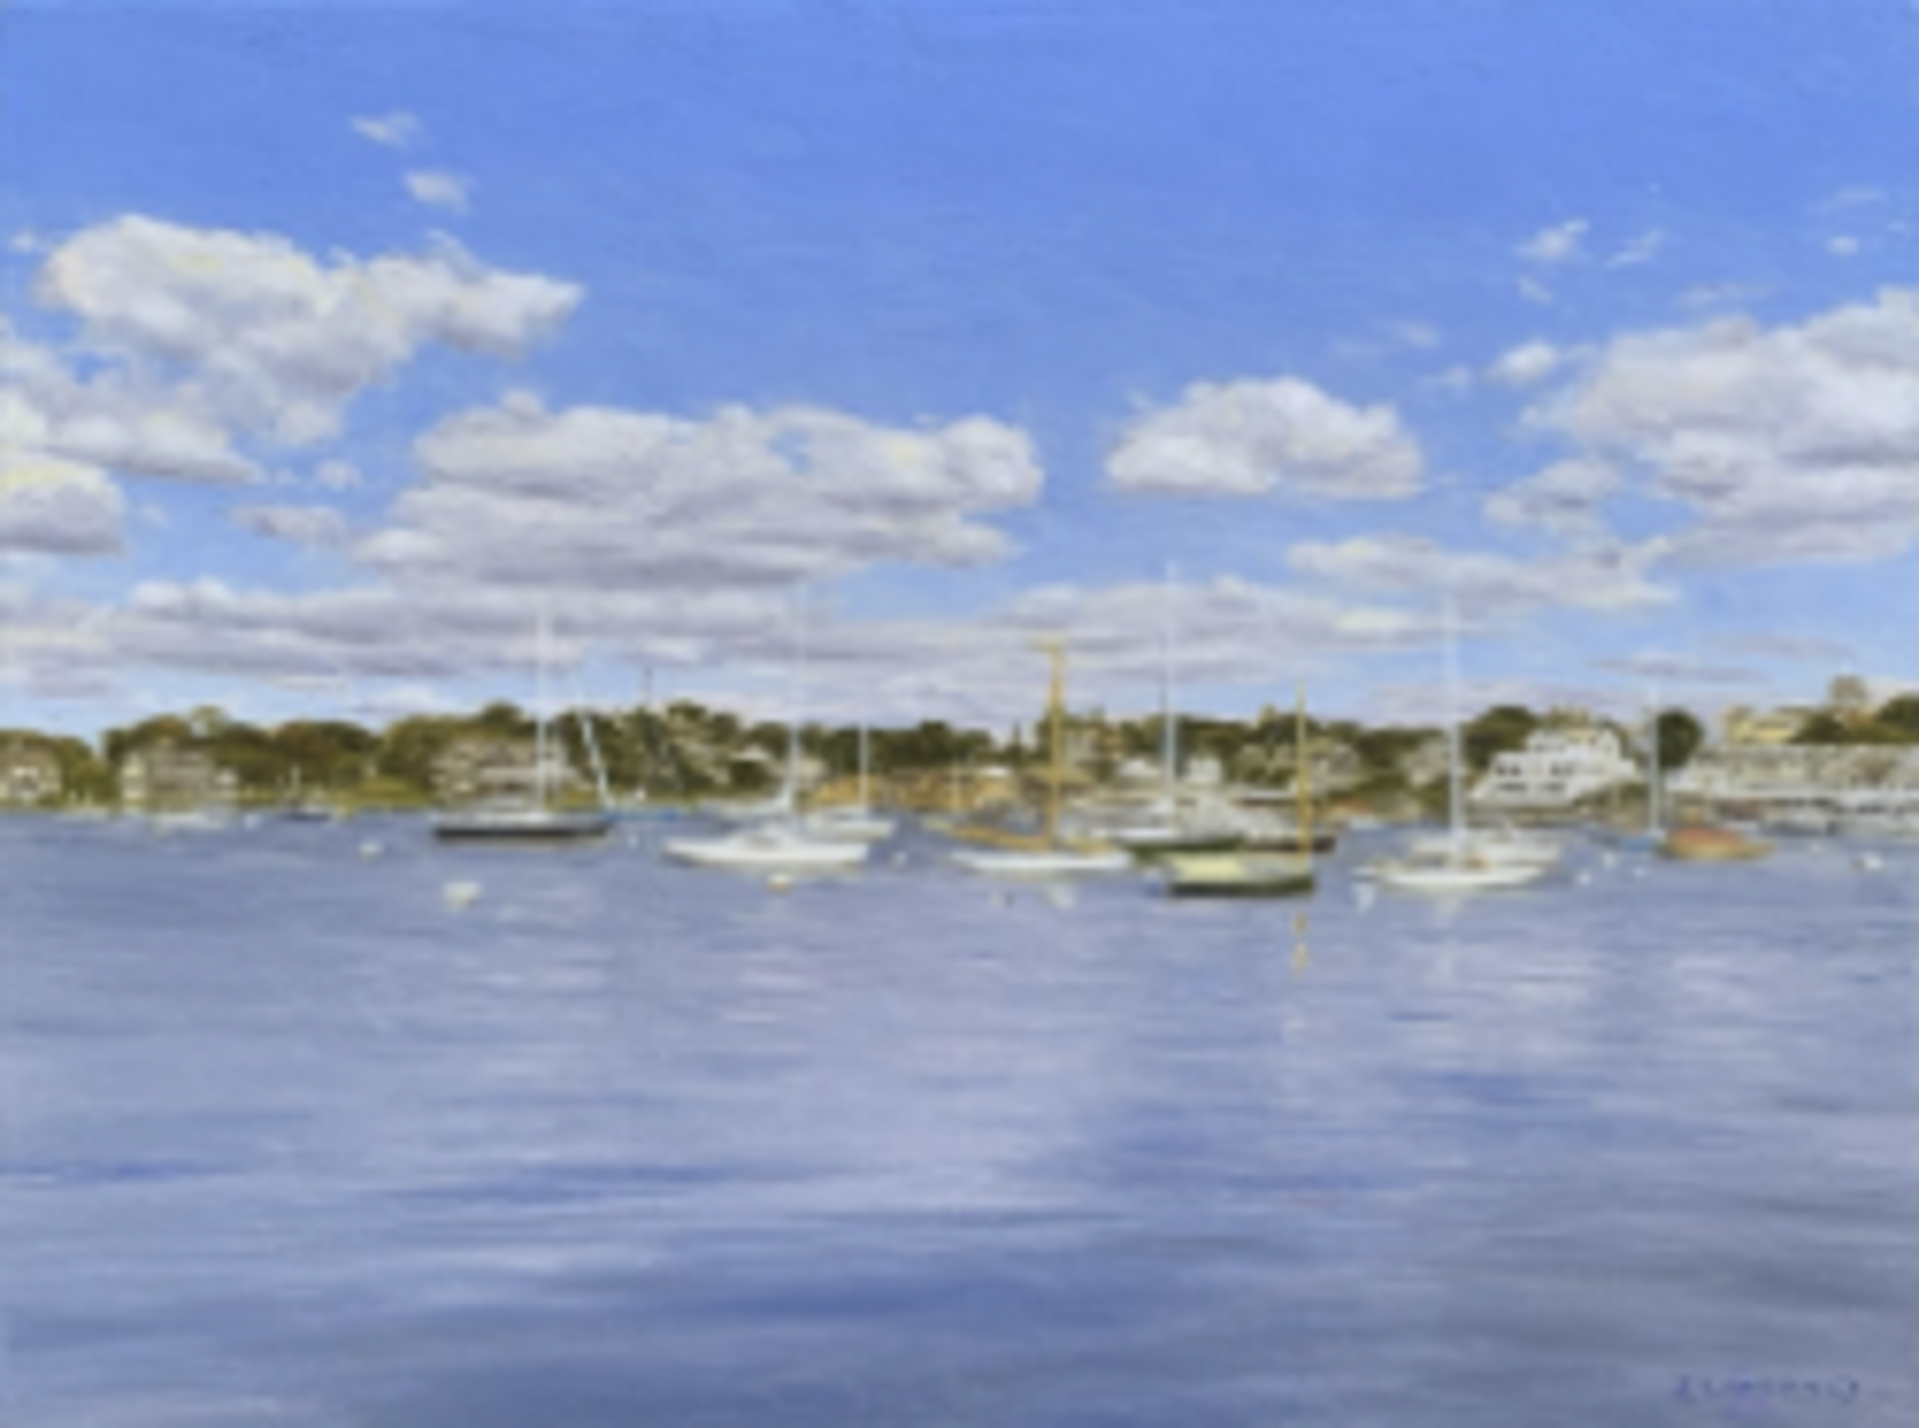 Boats on the Water by Lori Zummo